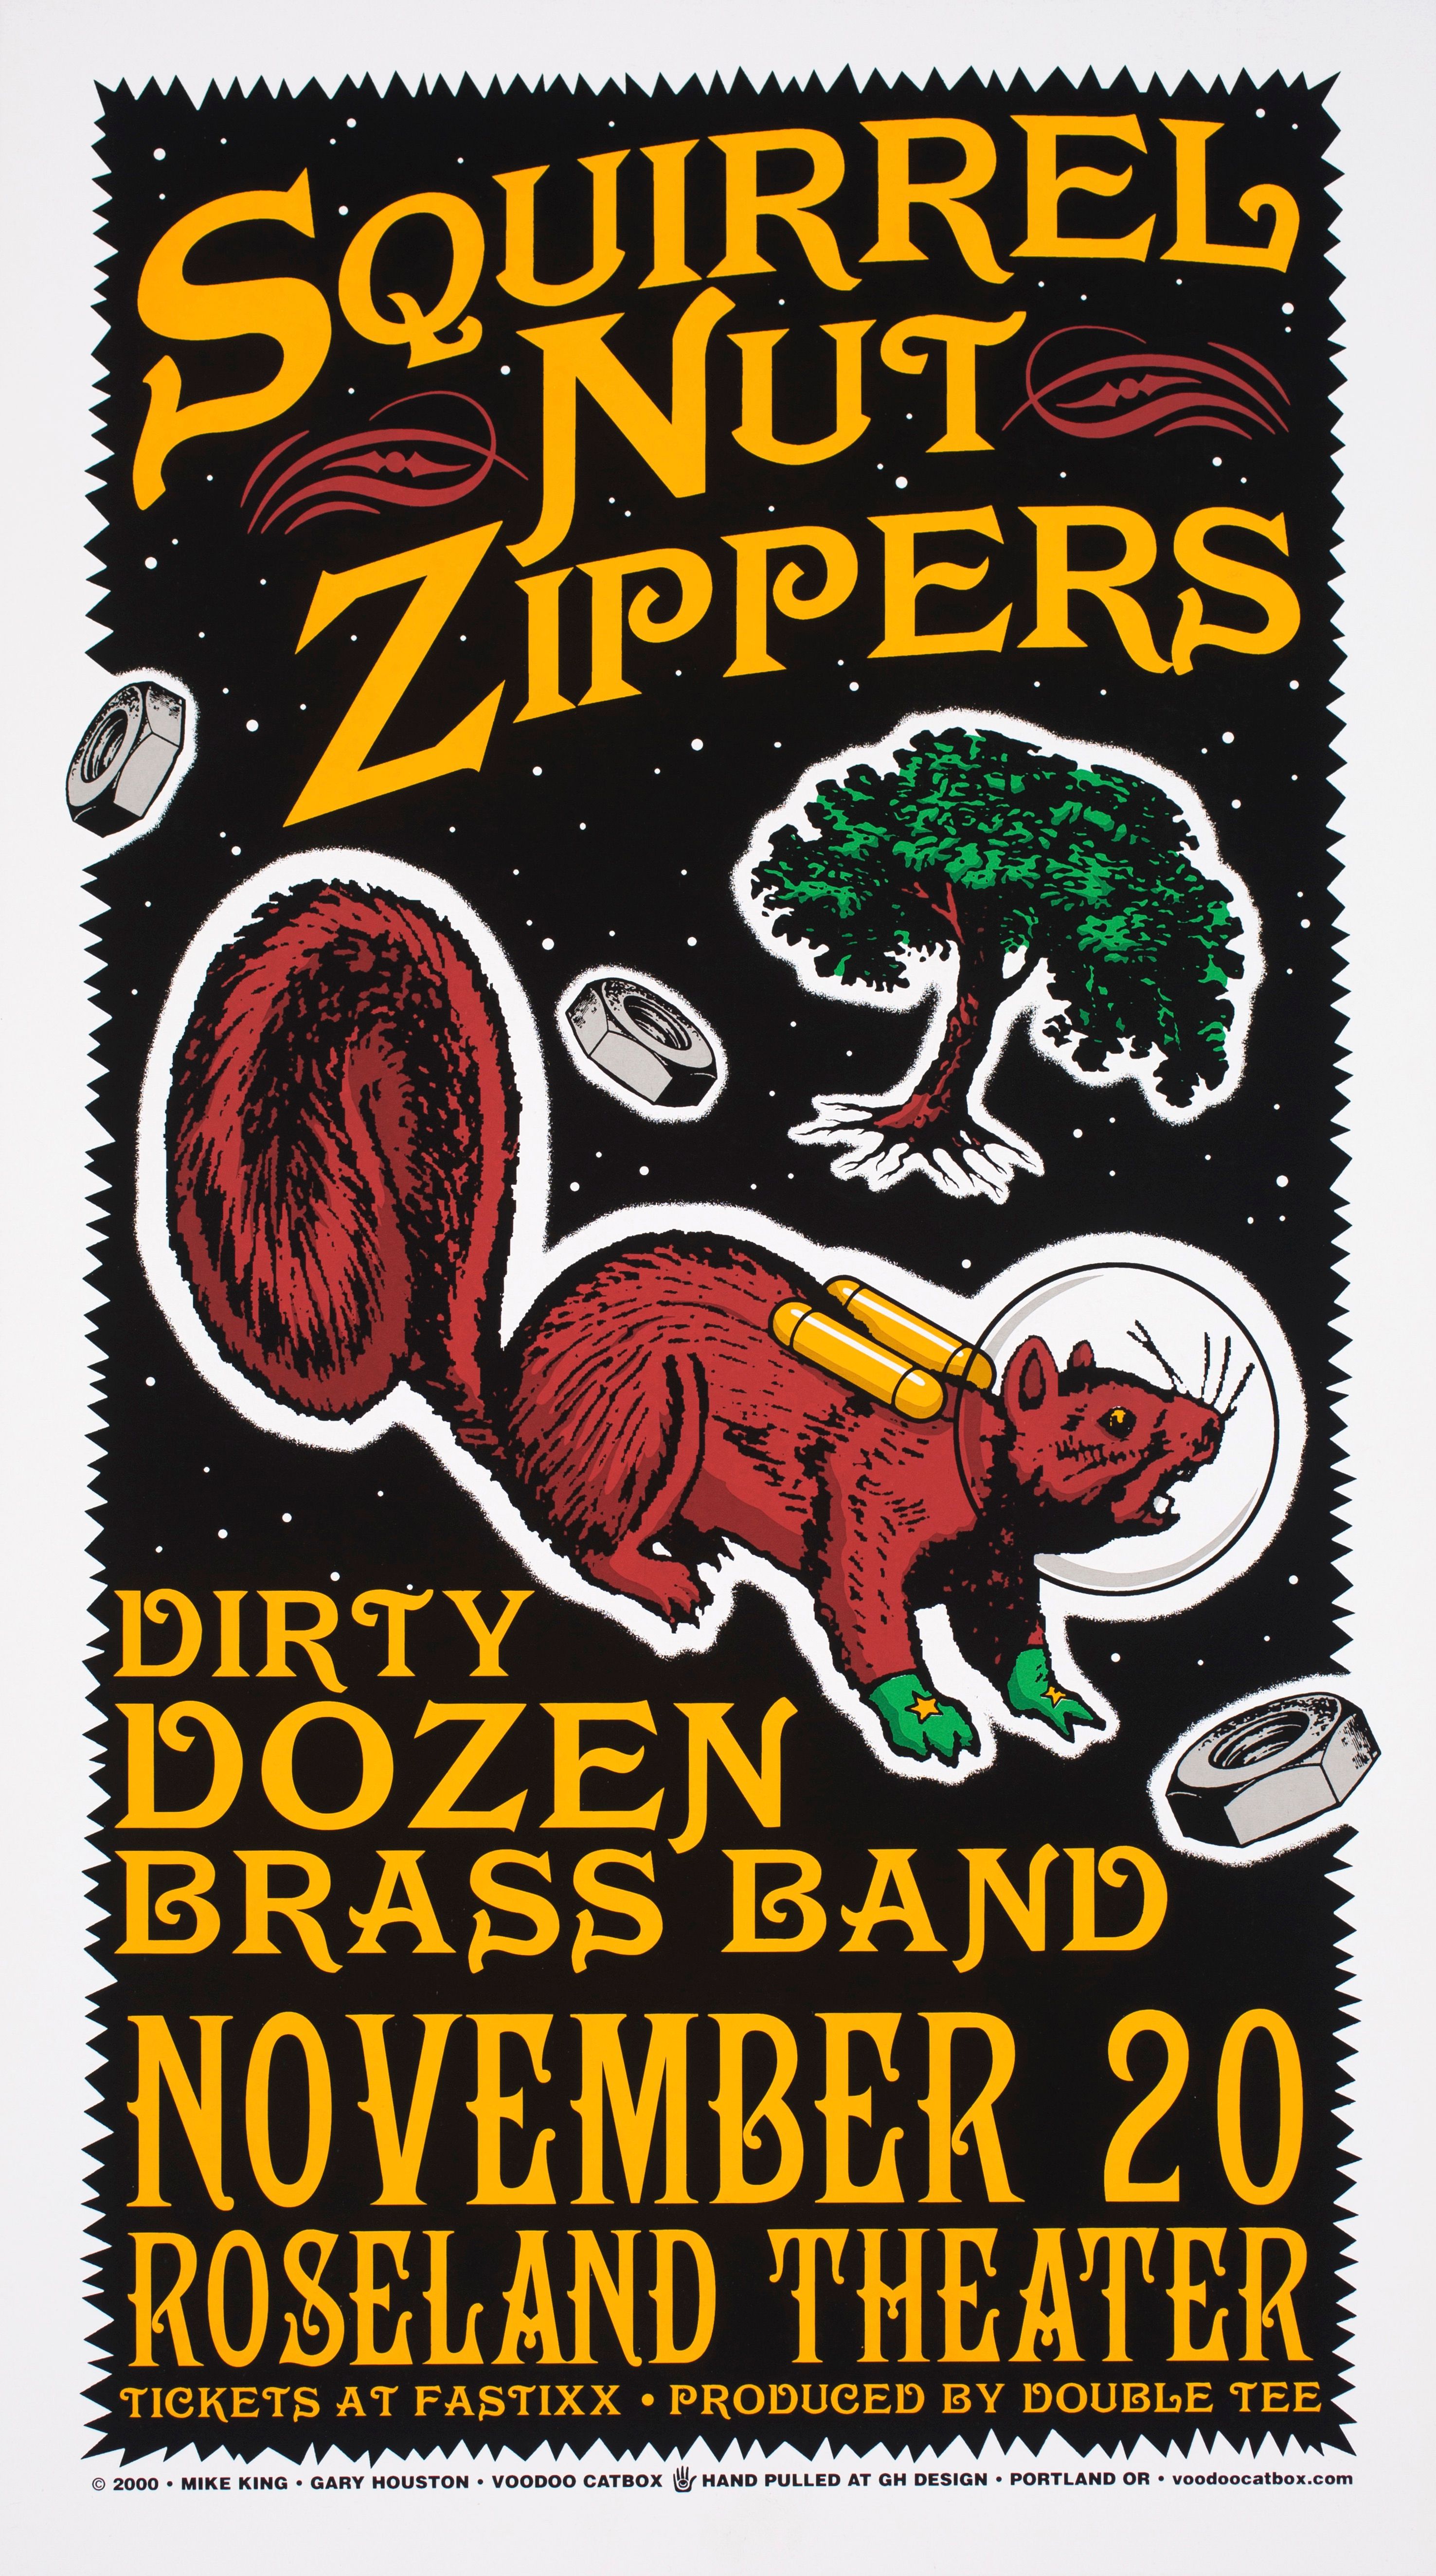 MXP-175.4 Squirrel Nut Zippers 2000 Roseland Theater  Nov 20 Concert Poster